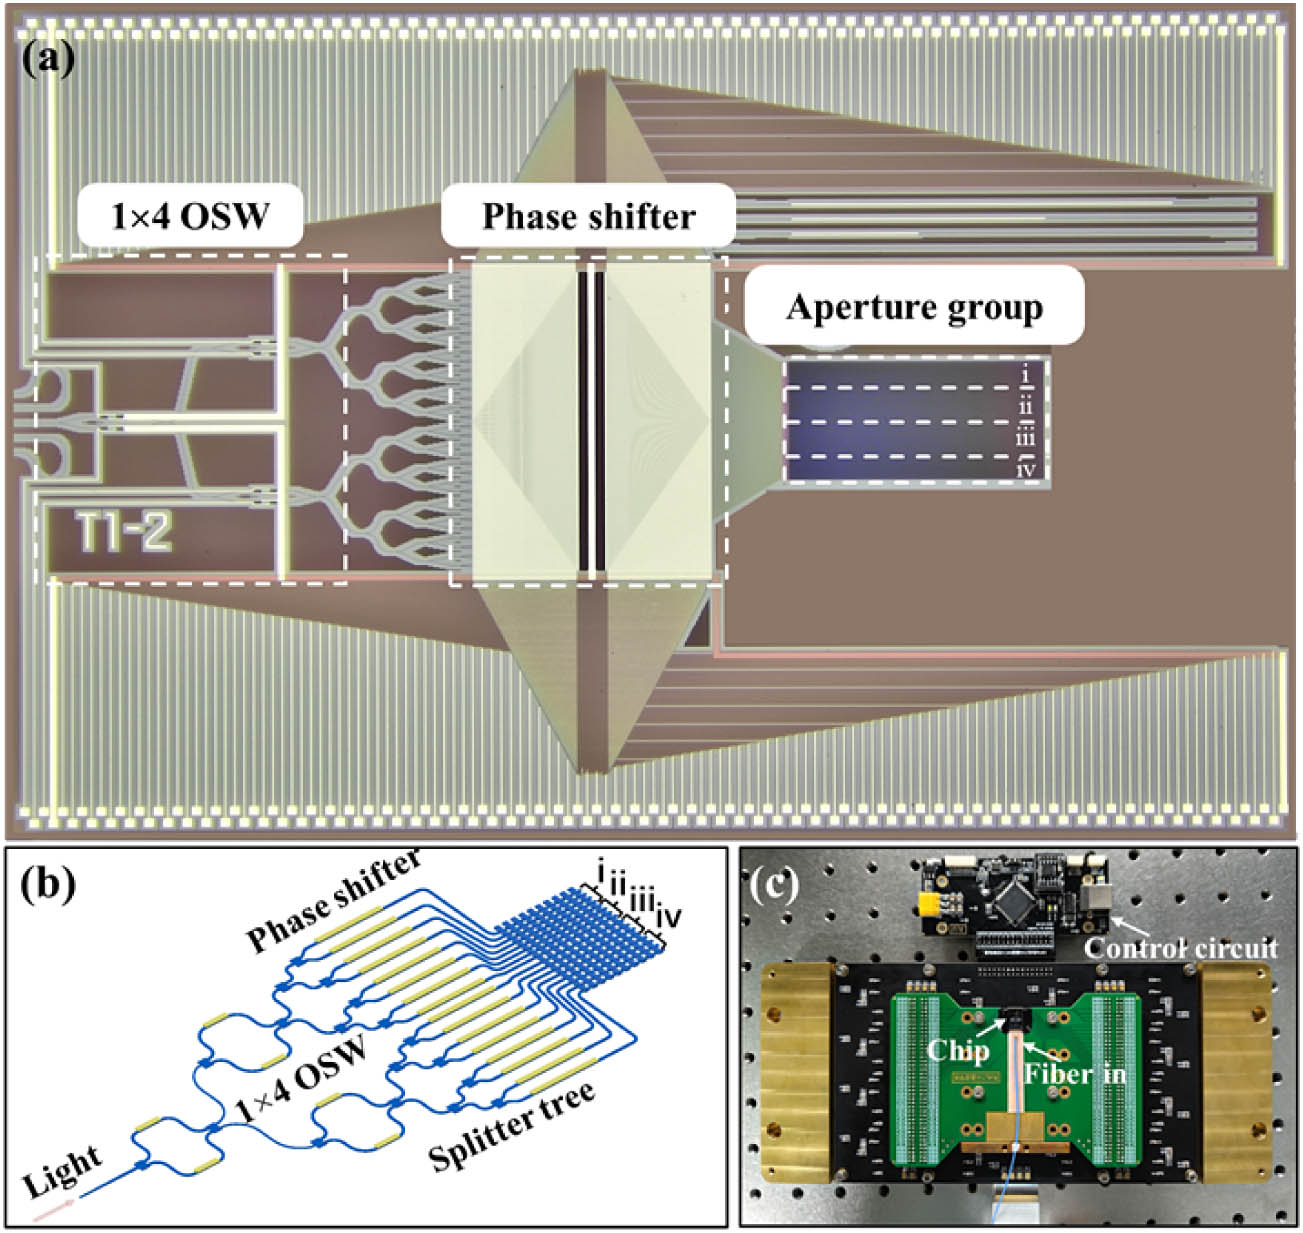 (a) Optical microscope image of the variable aperture OPA. (b) Schematic of the variable aperture OPA. (c) Electrically and optically packaged variable aperture OPA chip with control circuit.